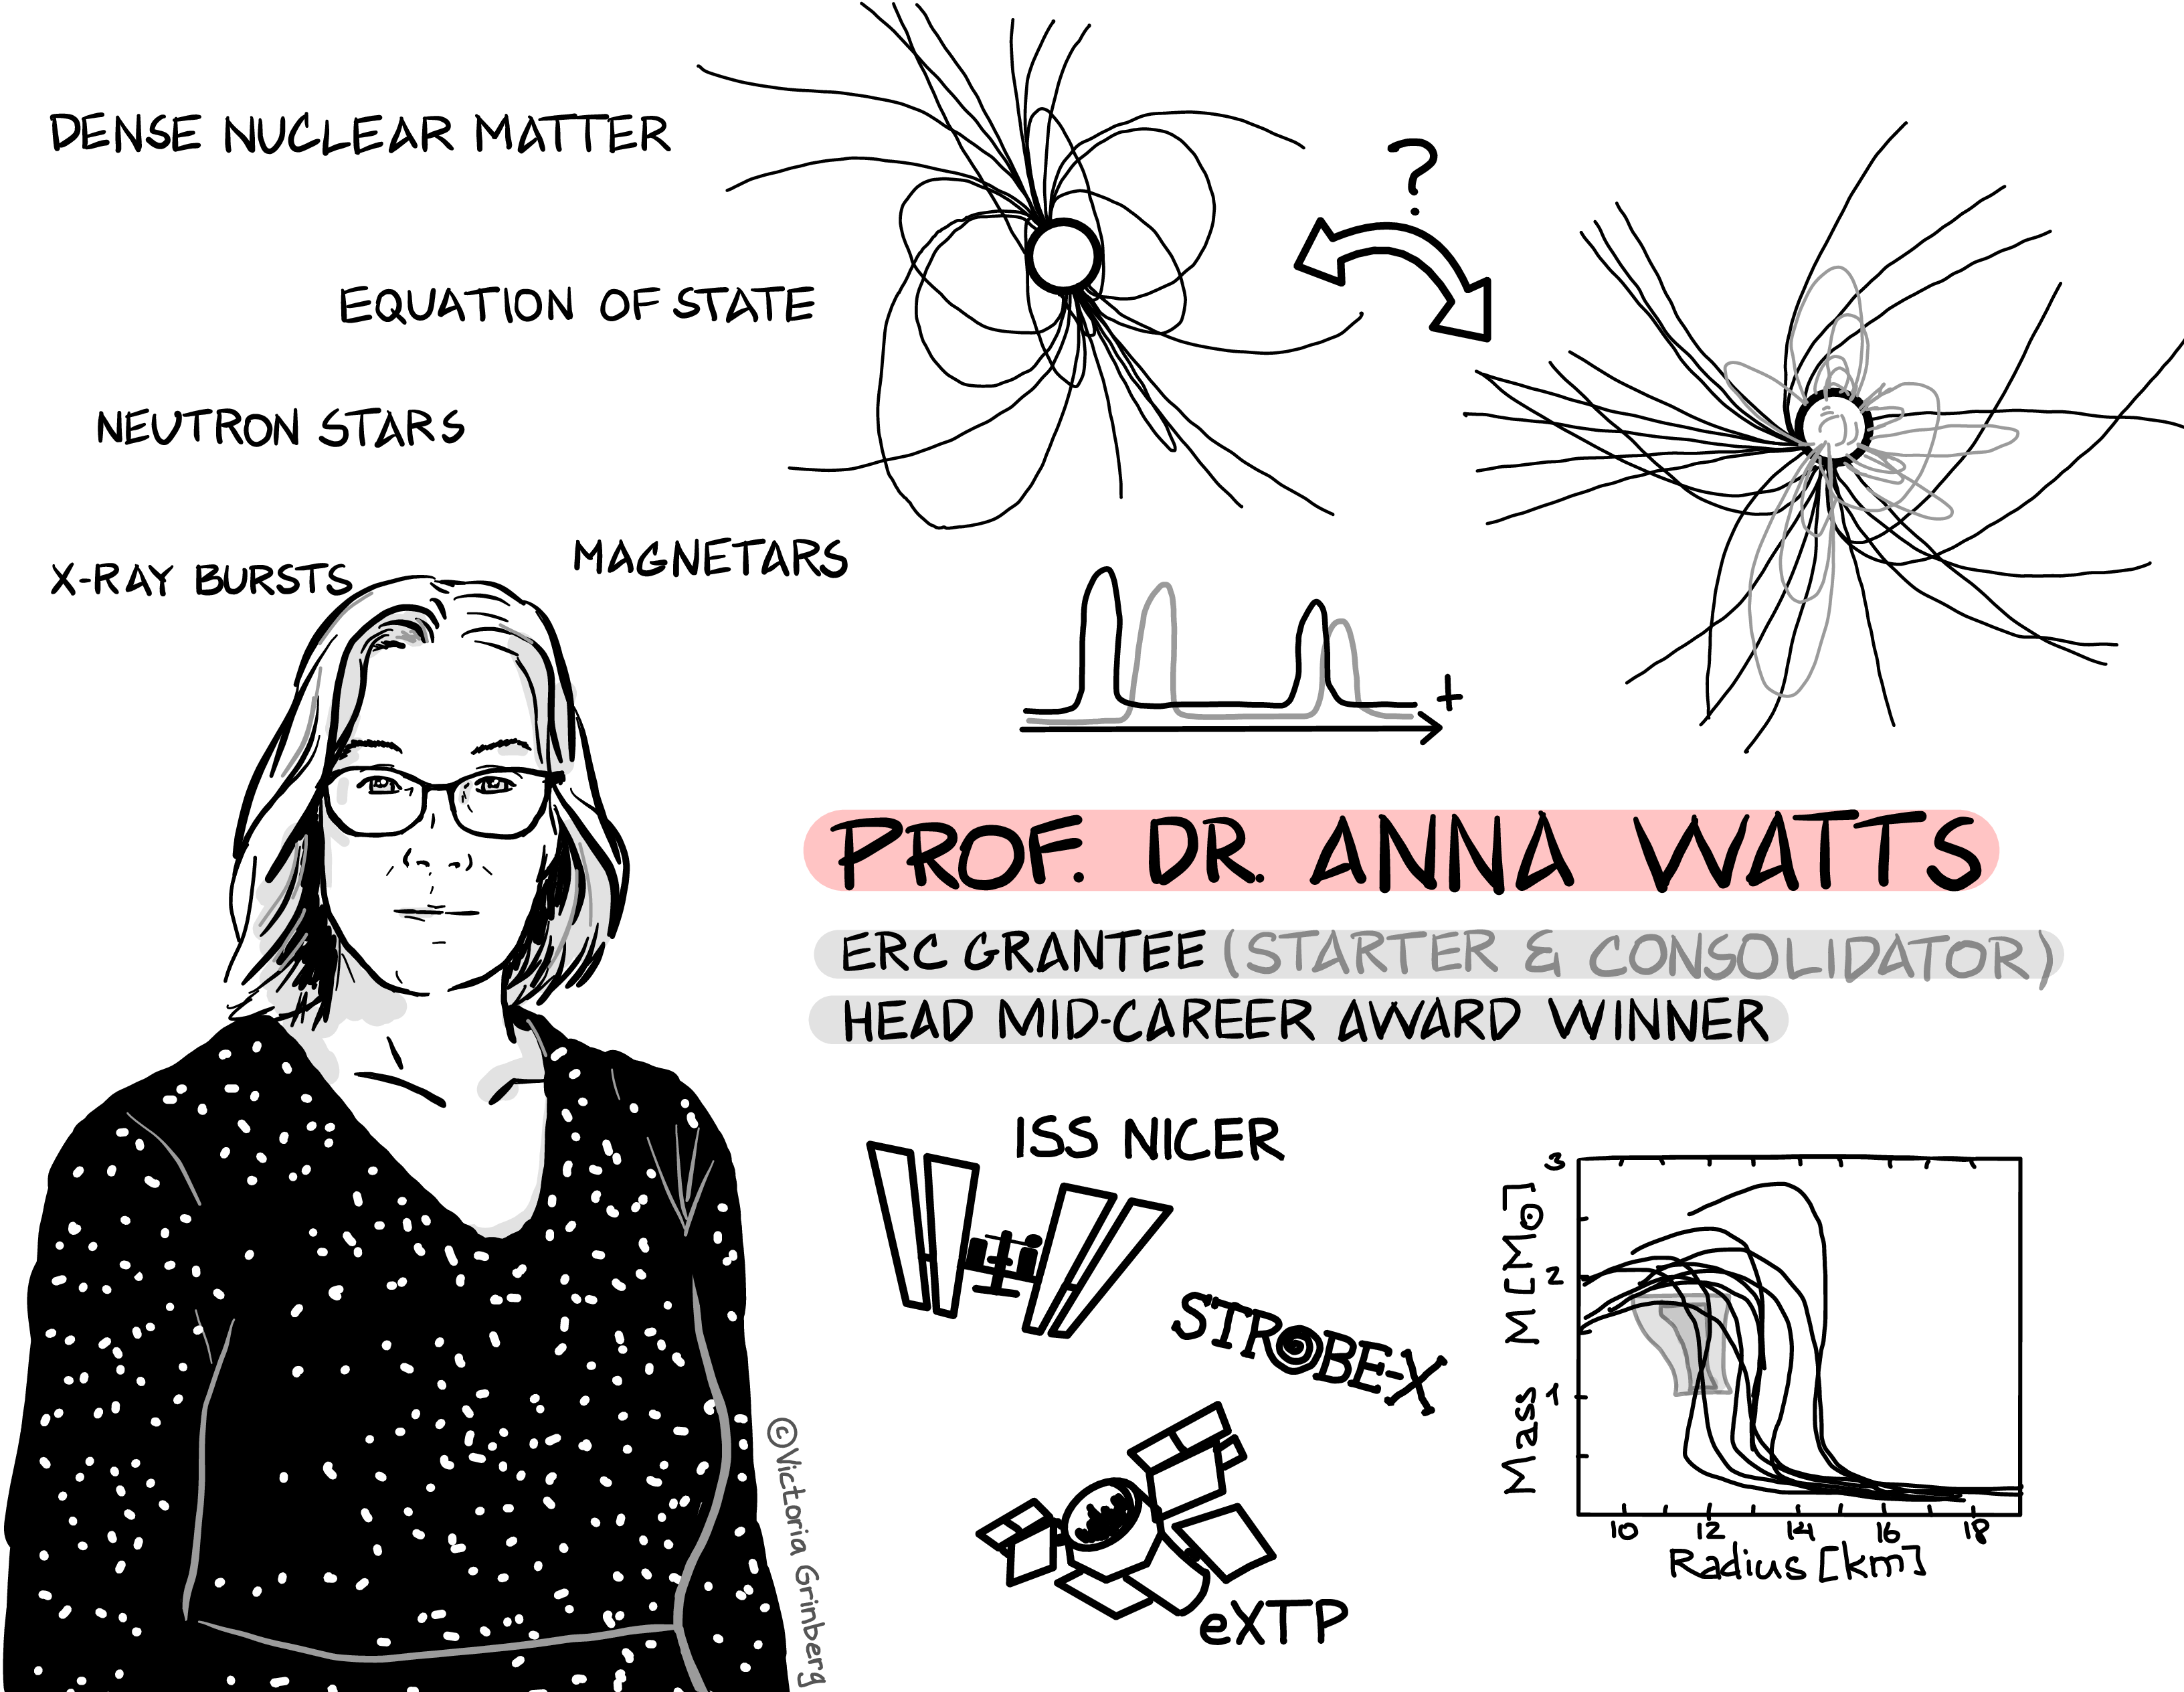 Drawing or Prof. Watts in a star-dress. Text 'Prof. Dr. Anna Watts, ERC grantee (started & consolidator), HEAD mid-career award winnder'. Around it arranged her science: Small drawings of the NICER and eXTP missions as well as the Strobe-X mission logo. Sketches of the mass-radius relationship for neutron stars and multiple neutron star magnetic field configuration as well as varibility data to measure it. Words cloud: dense nuclear matter. Equation of state. Neutron stars. X-ray bursts. Magnetars.